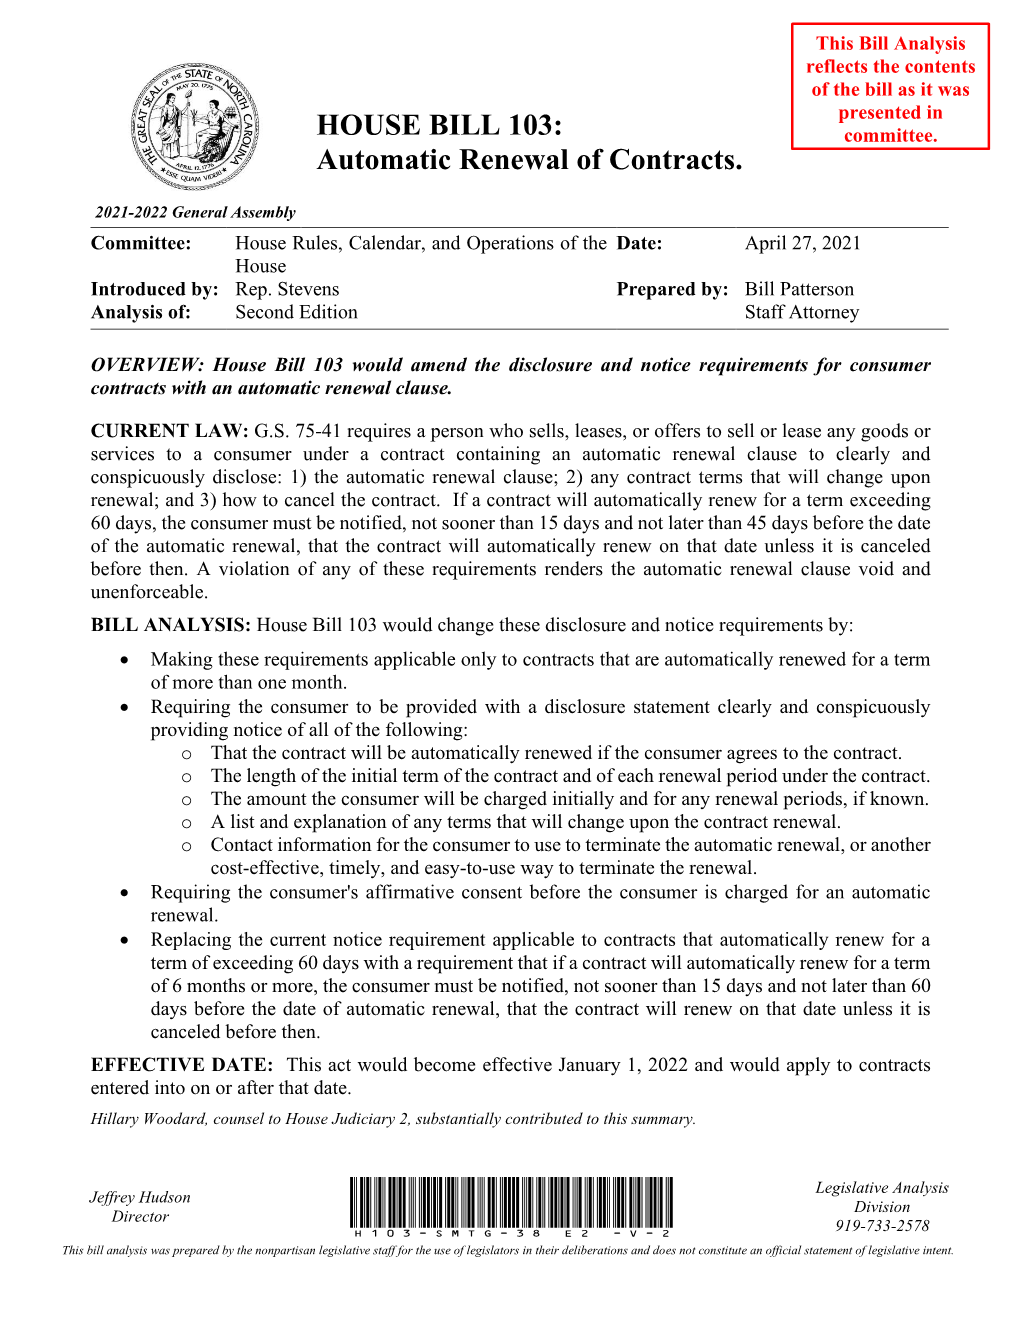 Automatic Renewal of Contracts